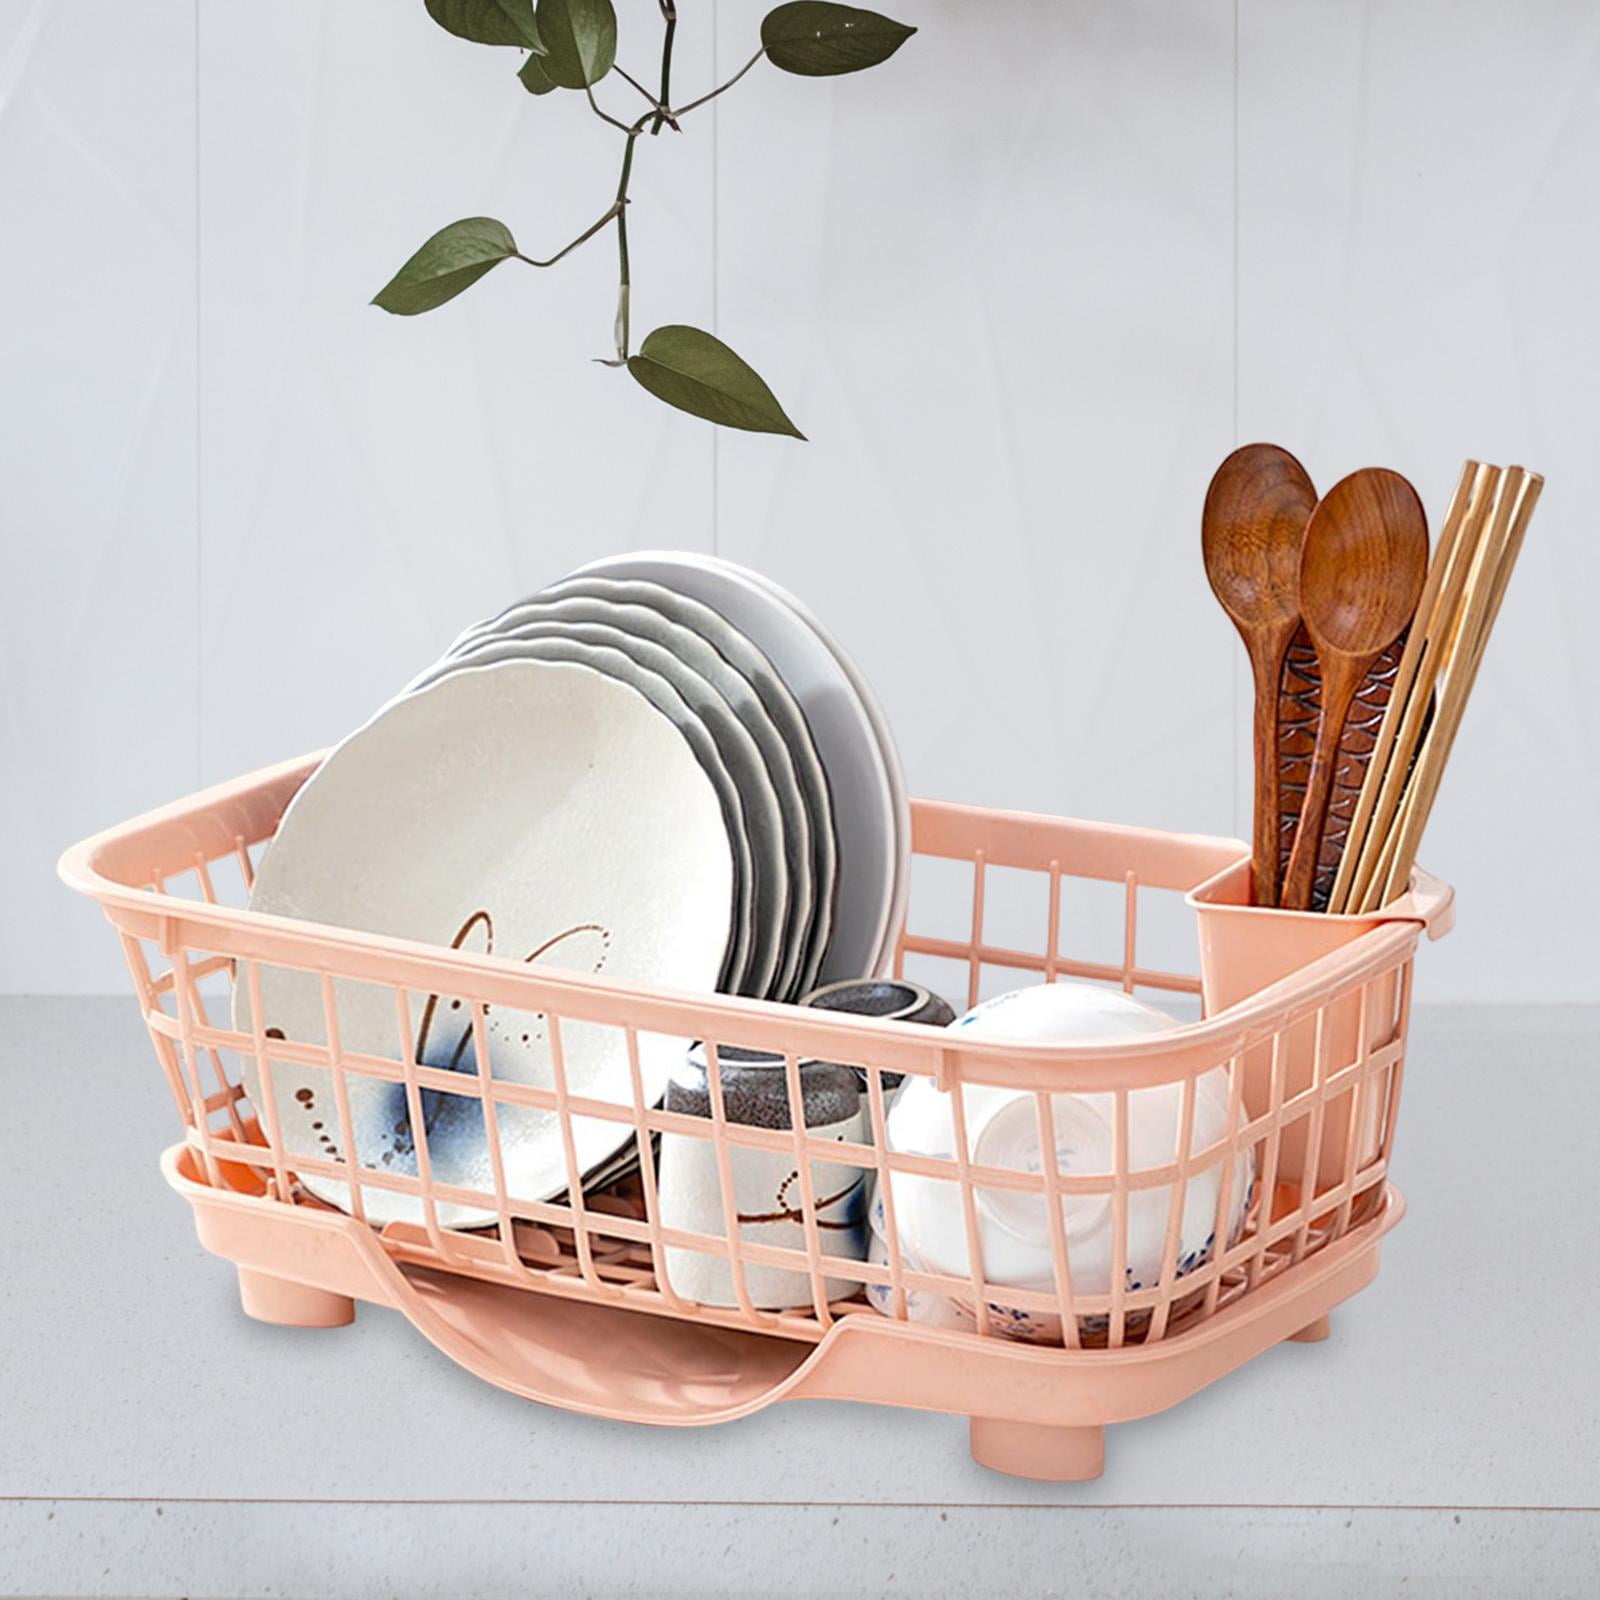 Dish Drainer Drying Rack with Cup Holder Foldable Cutlery Tray